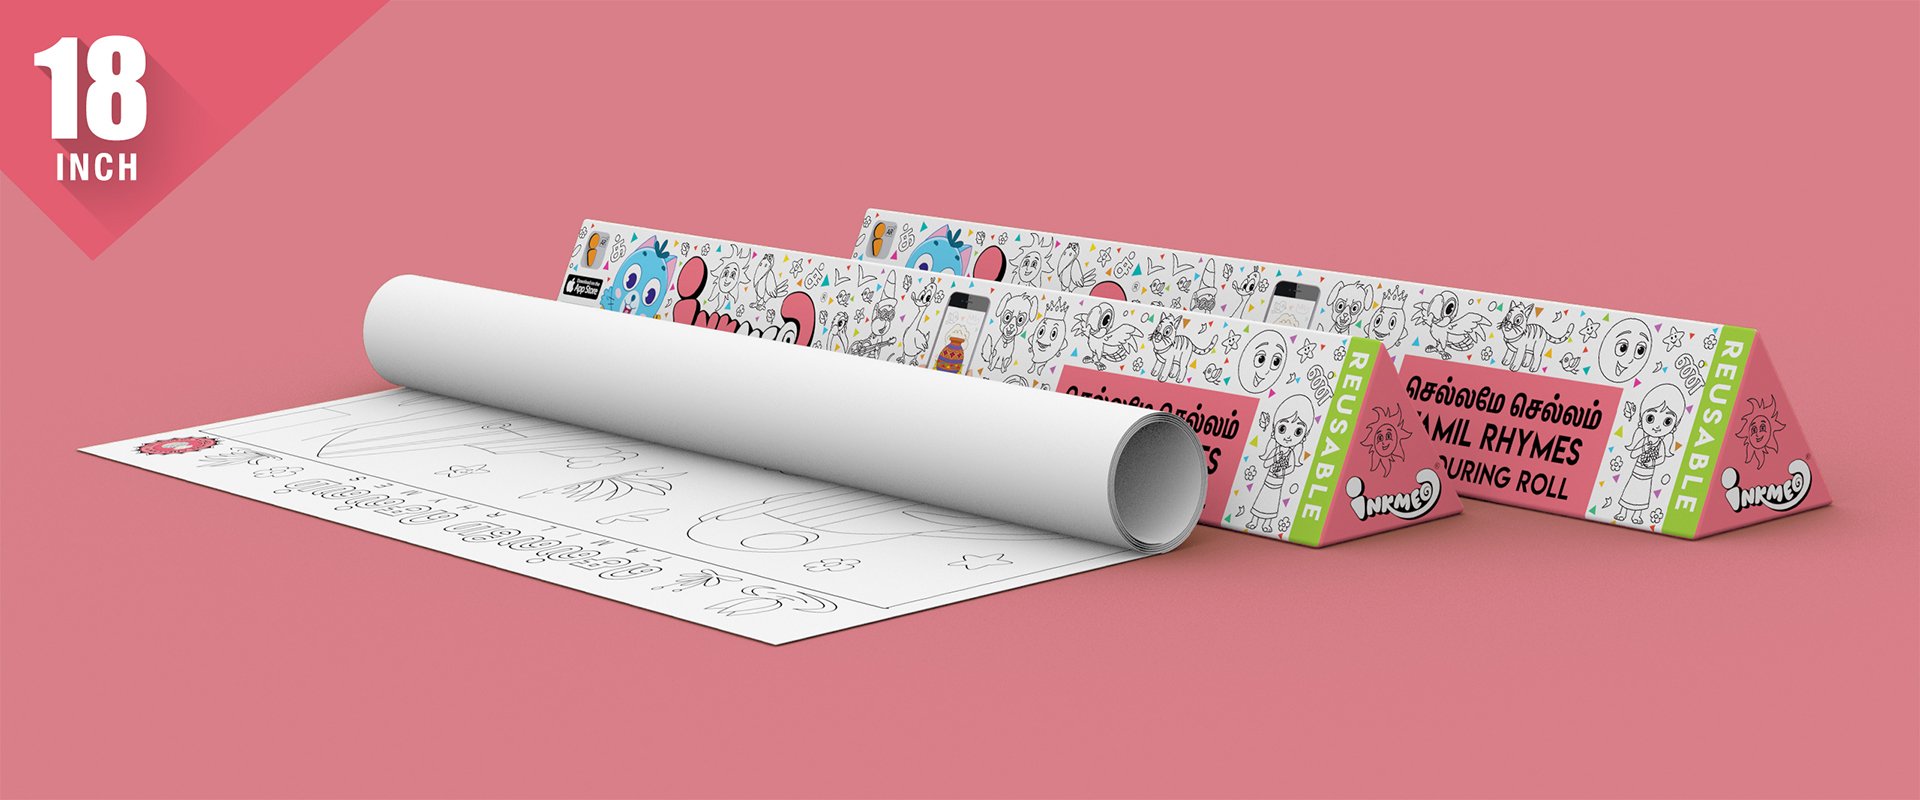 The image shows a pink background with two triangular boxes, one of which has paper rolled out.